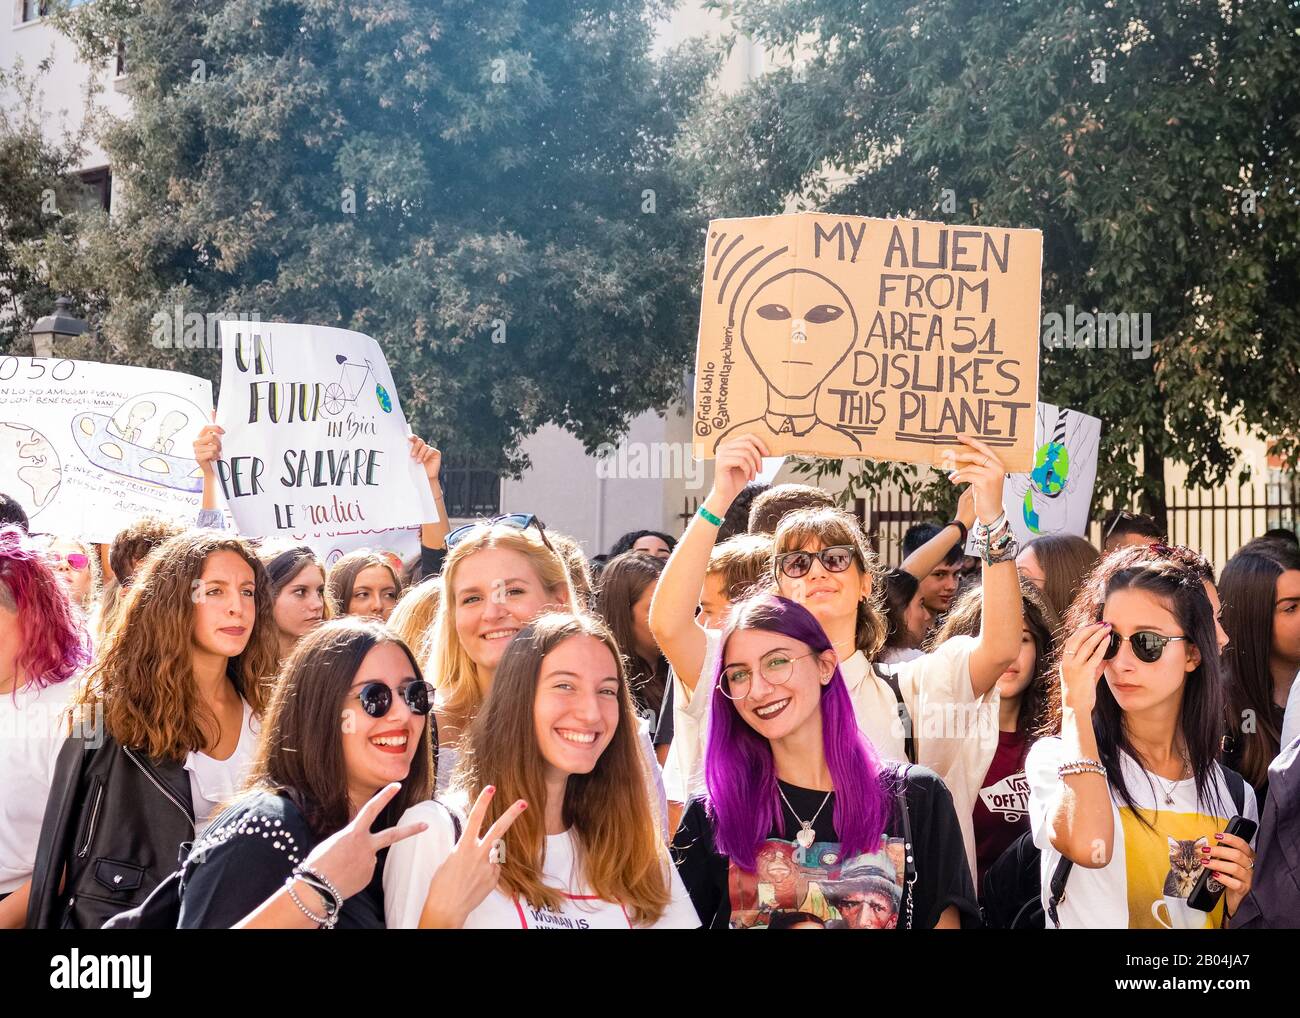 A procession made up of many young students protesting against climate change by displaying placards and banners with messages. Stock Photo